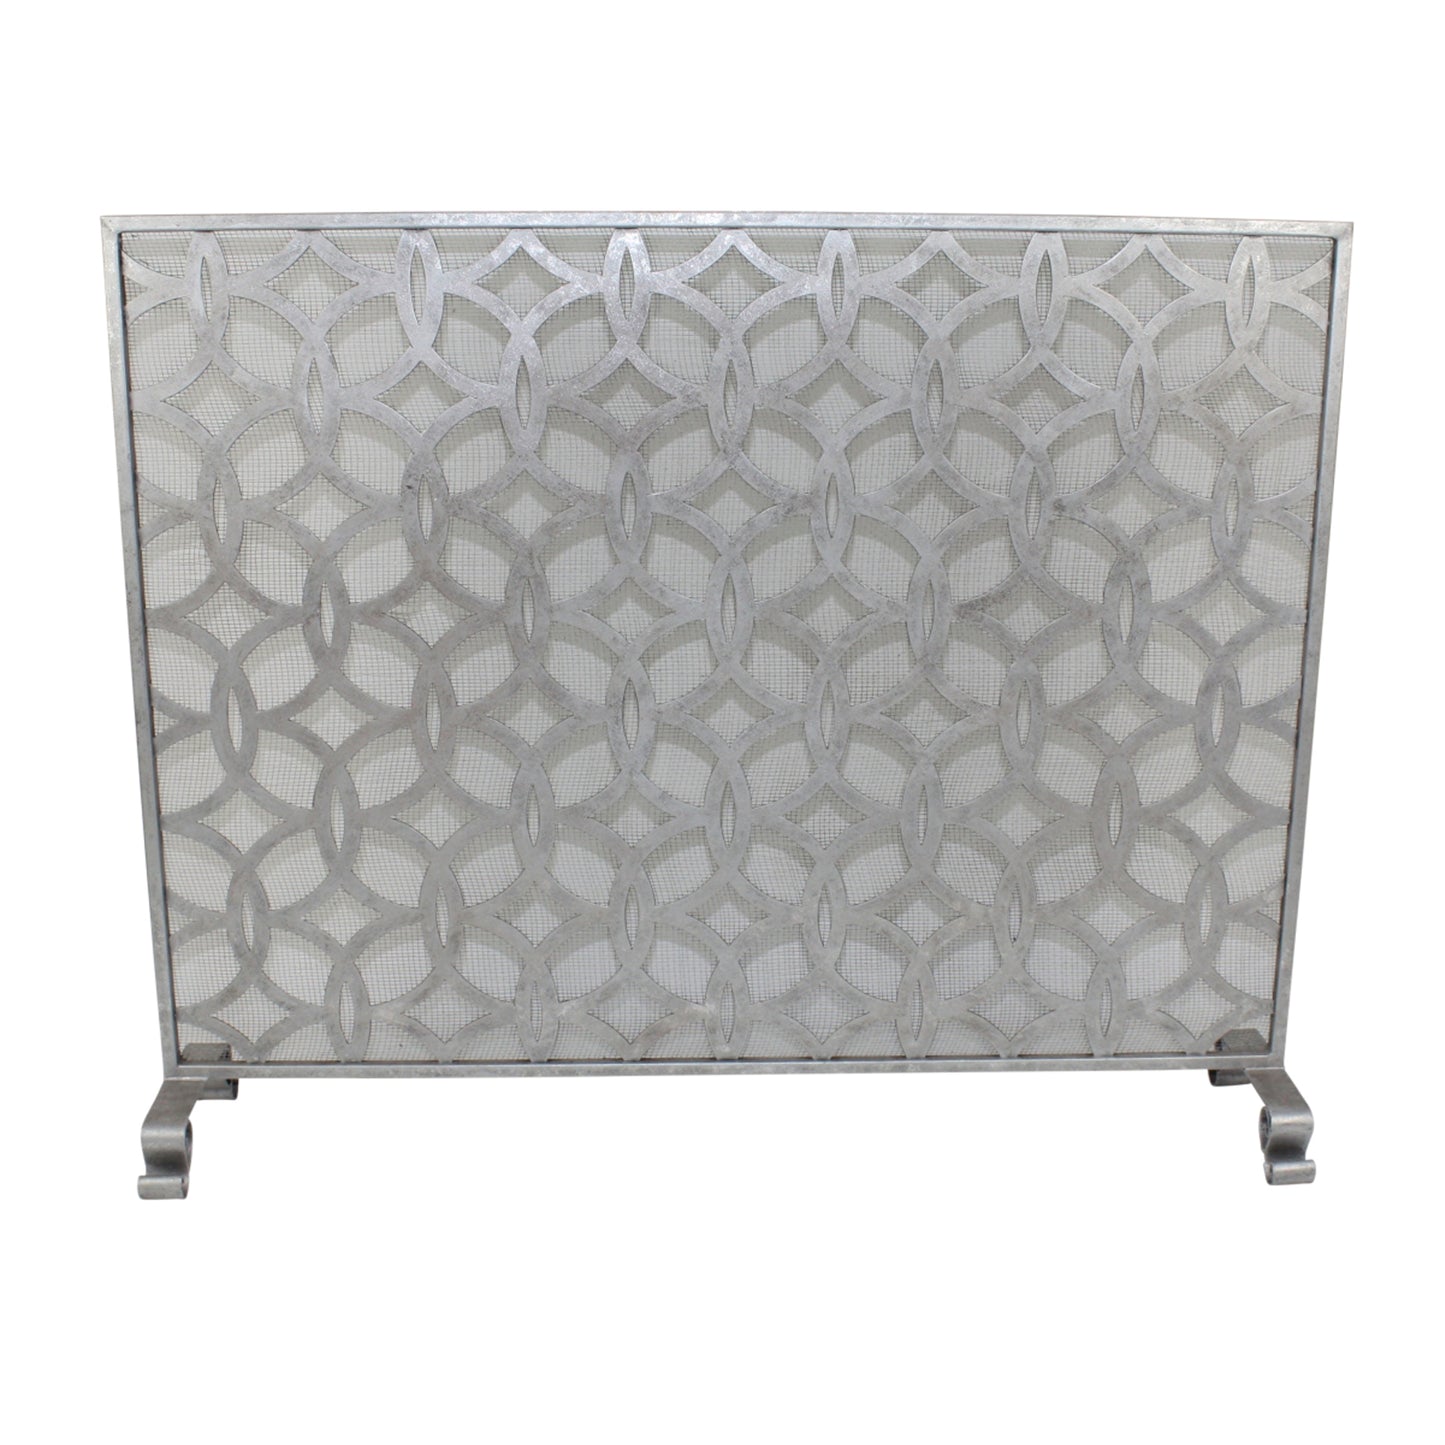 Fireplace Screen in Antique Silver Interlaced Circles